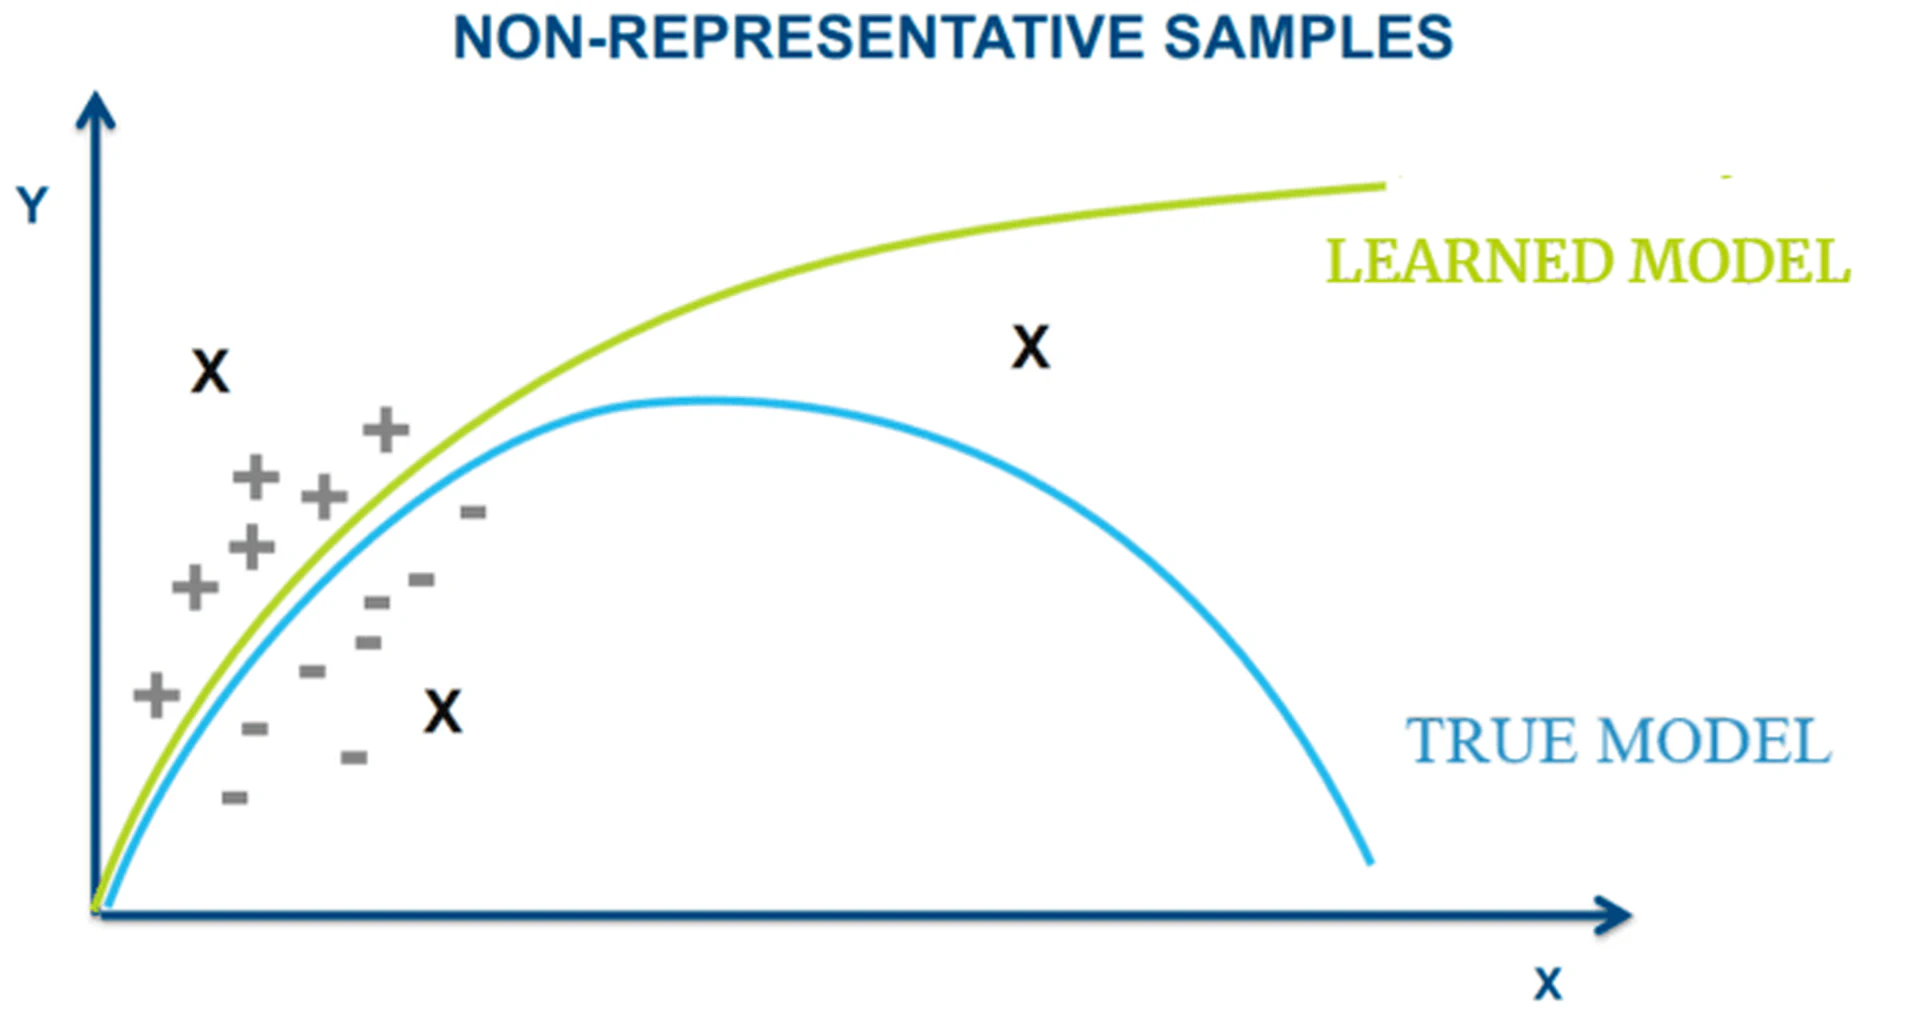 An example of measuring errors. The green line denotes the learned model and the blue one is the true model. `+' and `-' represent training data belonging to different classes; `X' represents testing data. Image taken from Getoor's slides for 2019 IEEE Big Data keynotewith permission.